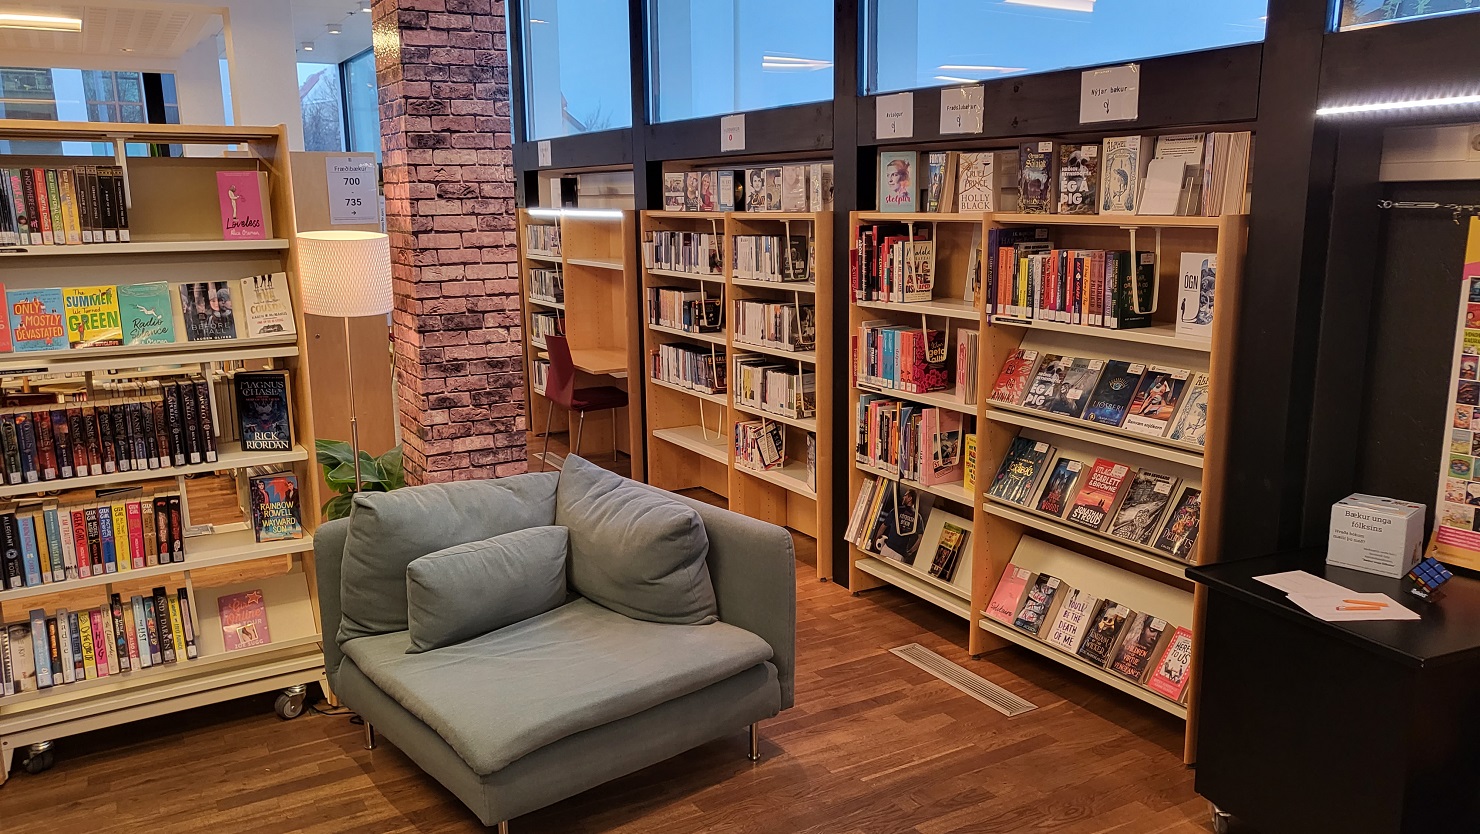 Picture from the youth department, shelves with books and a corner sofa